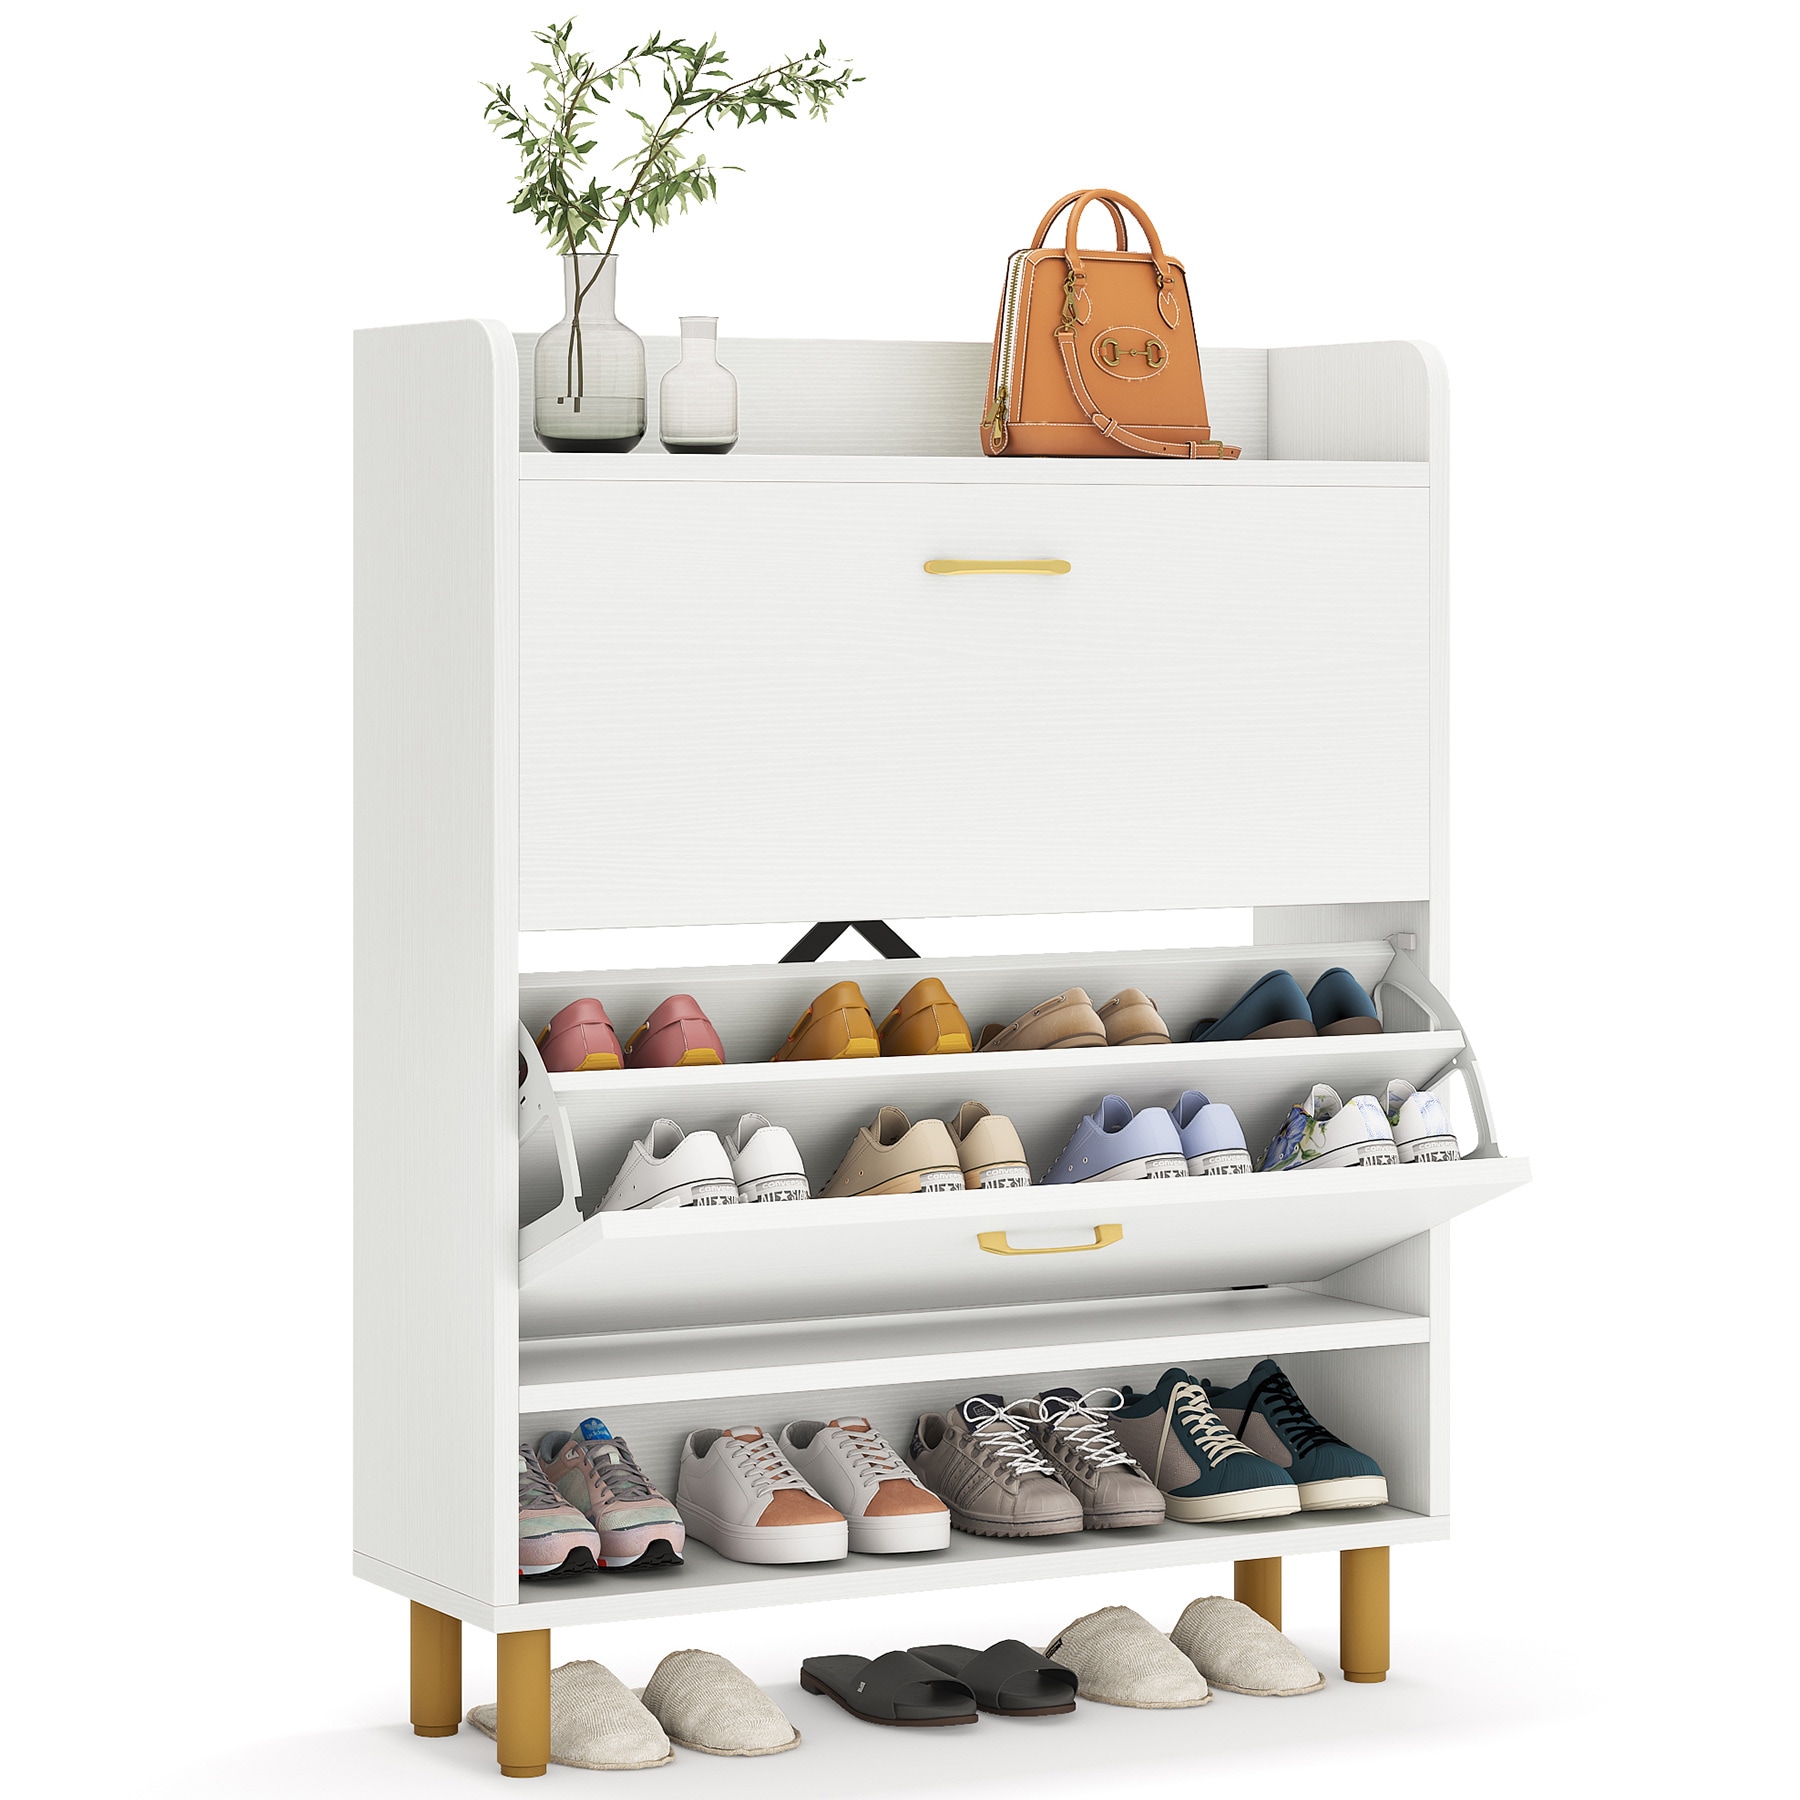 Tribesigns White MDF Shoe Cabinet with 3 Tiers and Adjustable Shelves - 24 Pair Shoe Storage Organizer for Entryway, Bedroom, Hallway | HOGA-JW0310